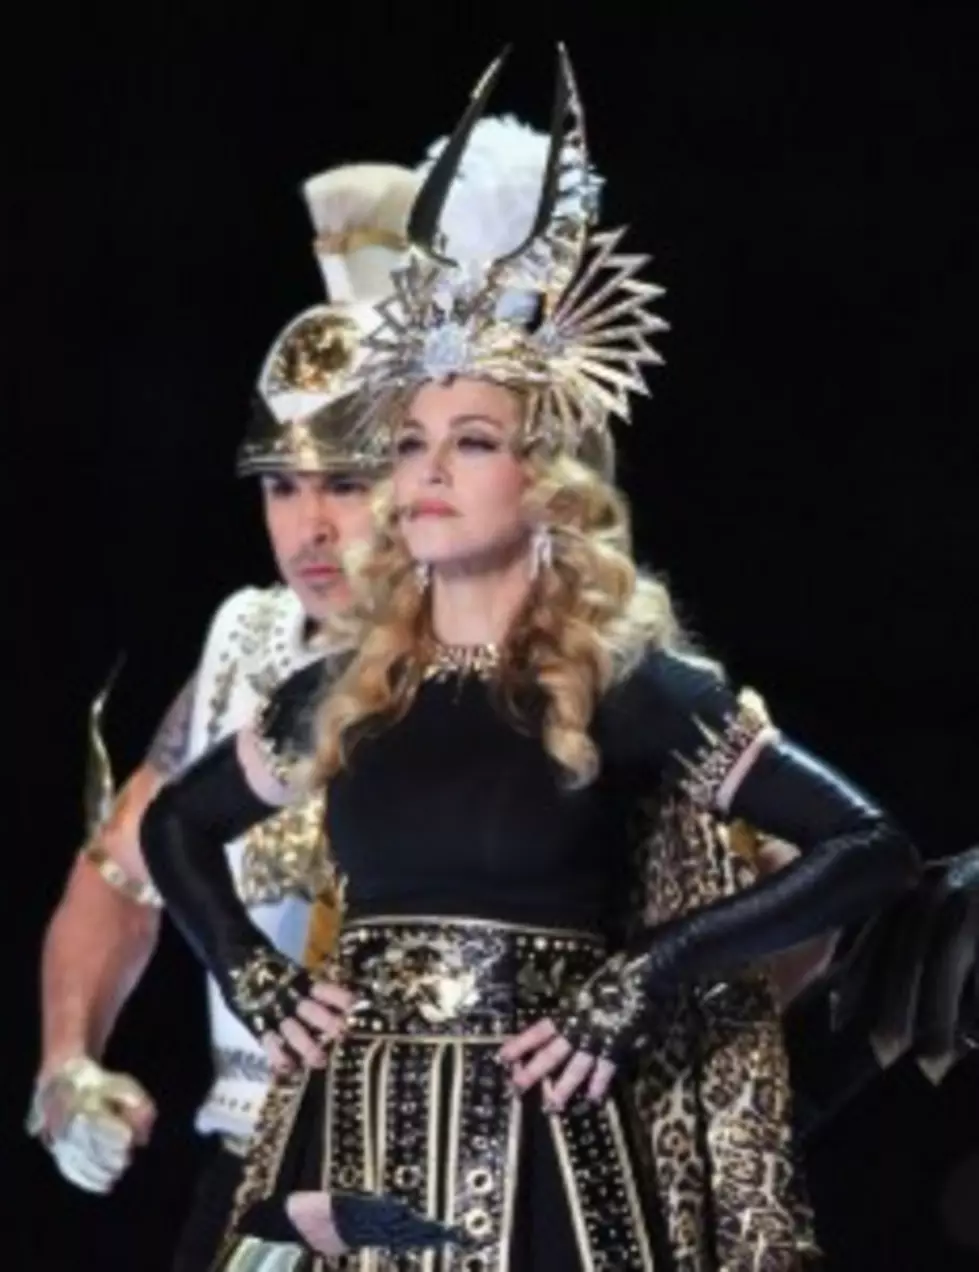 Madonna, MIA, and the Middle Finger &#8211; Was it Really a Big Deal? [VIDEO, POLL]